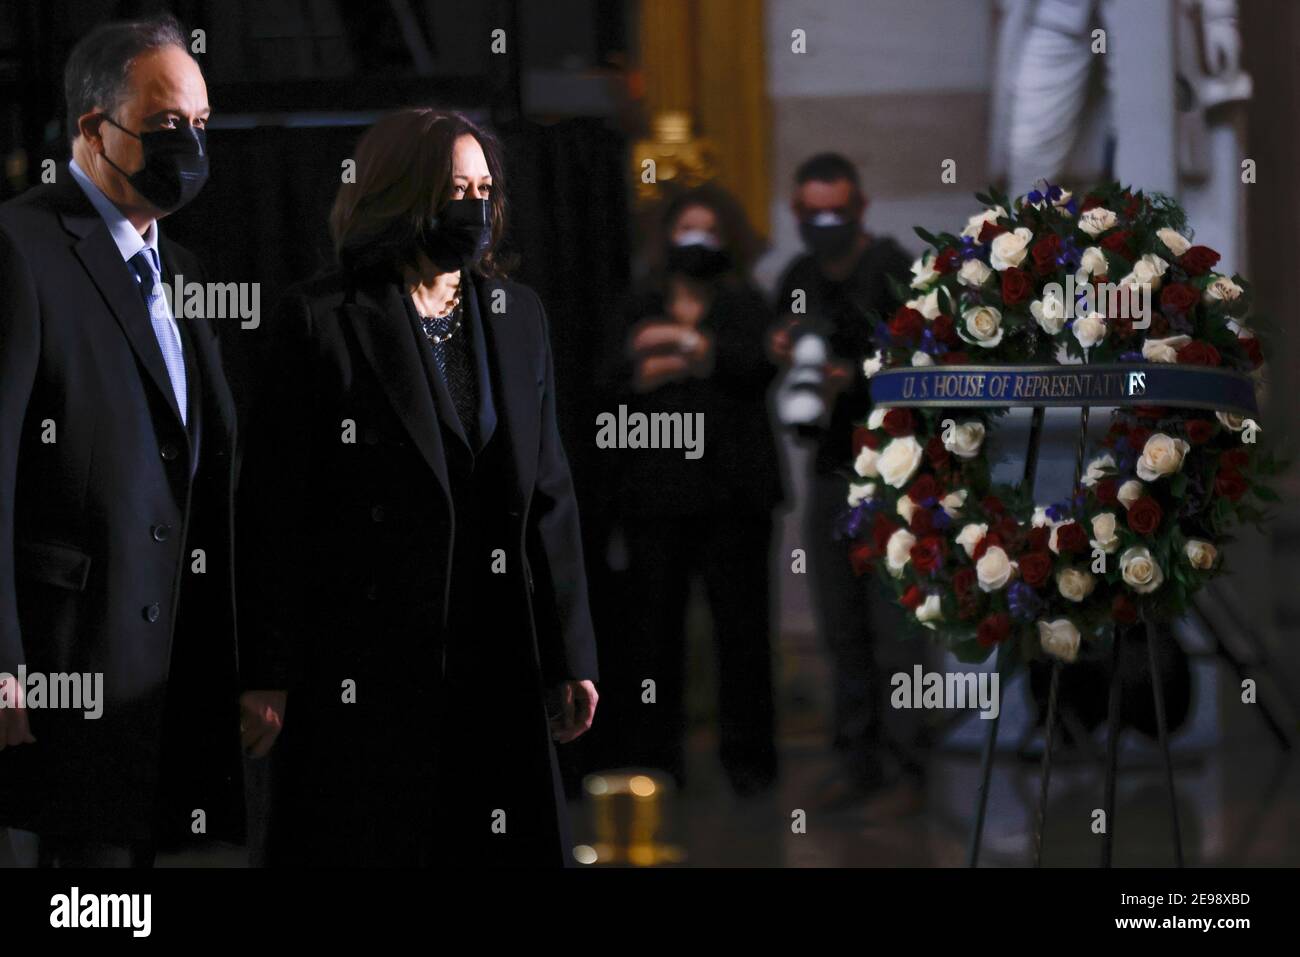 Washigton, USA. 03rd Feb, 2021. U.S. Vice President Kamala Harris and her husband Doug Emhoff pay their respects as the remains of Capitol Police officer Brian Sicknick lay in honor in the Rotunda of the U.S. Capitol building after he died on Jan. 7 from injuries he sustained while protecting the U.S. Capitol during the Jan. 6 attack on the building, in Washington, DC, U.S. February 3, 2021. (Photo by Carlos Barria/Pool/Sipa USA) Credit: Sipa USA/Alamy Live News Stock Photo